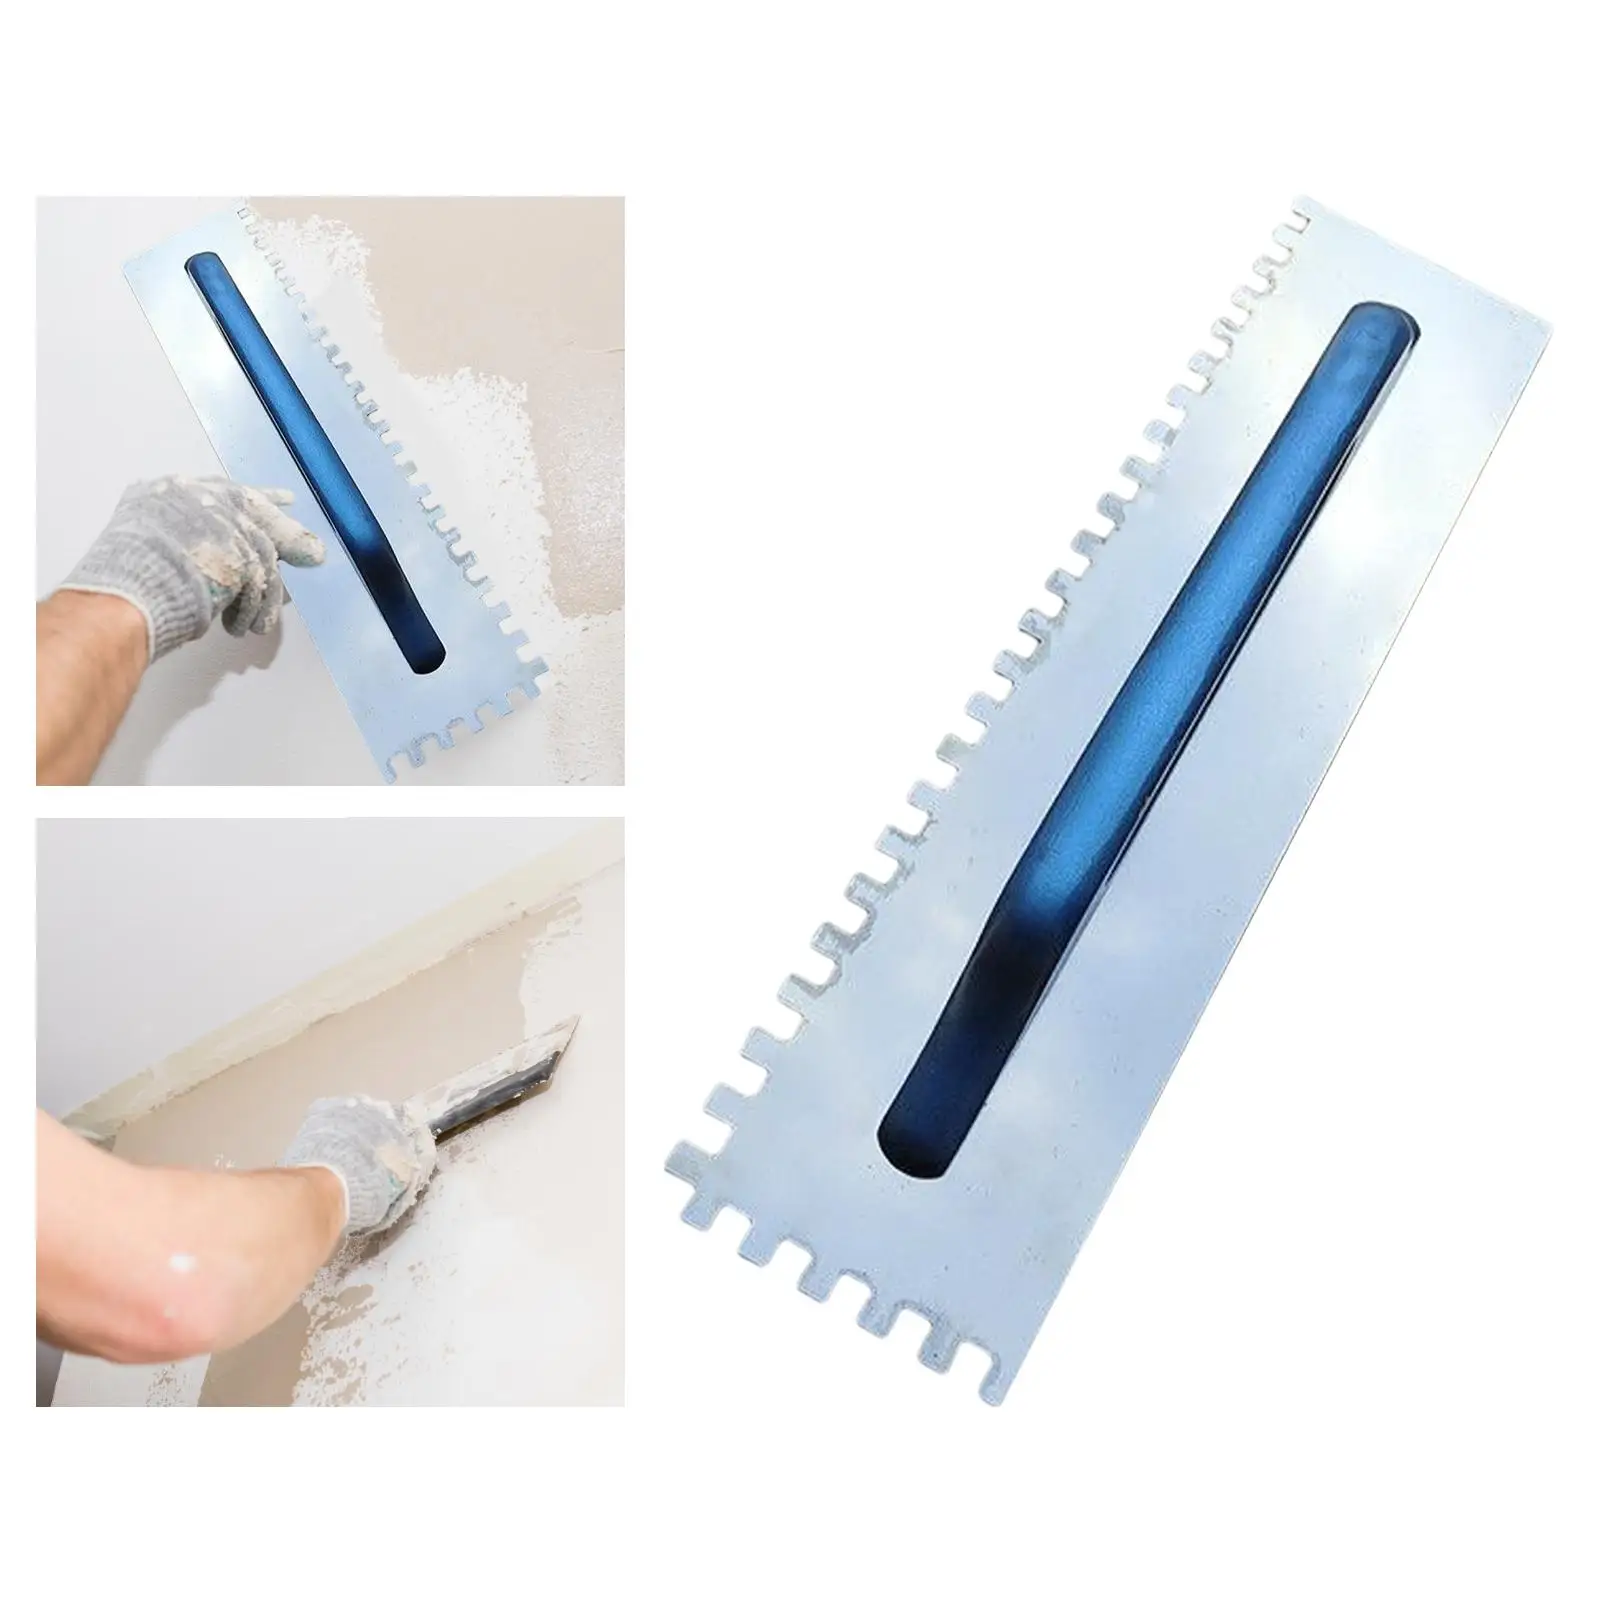 Drywall Smoothing Tool Wall Plastering Skimming Portable Concrete Scraping Tool Plaster Trowel Flooring Grout Float Tiling Tool